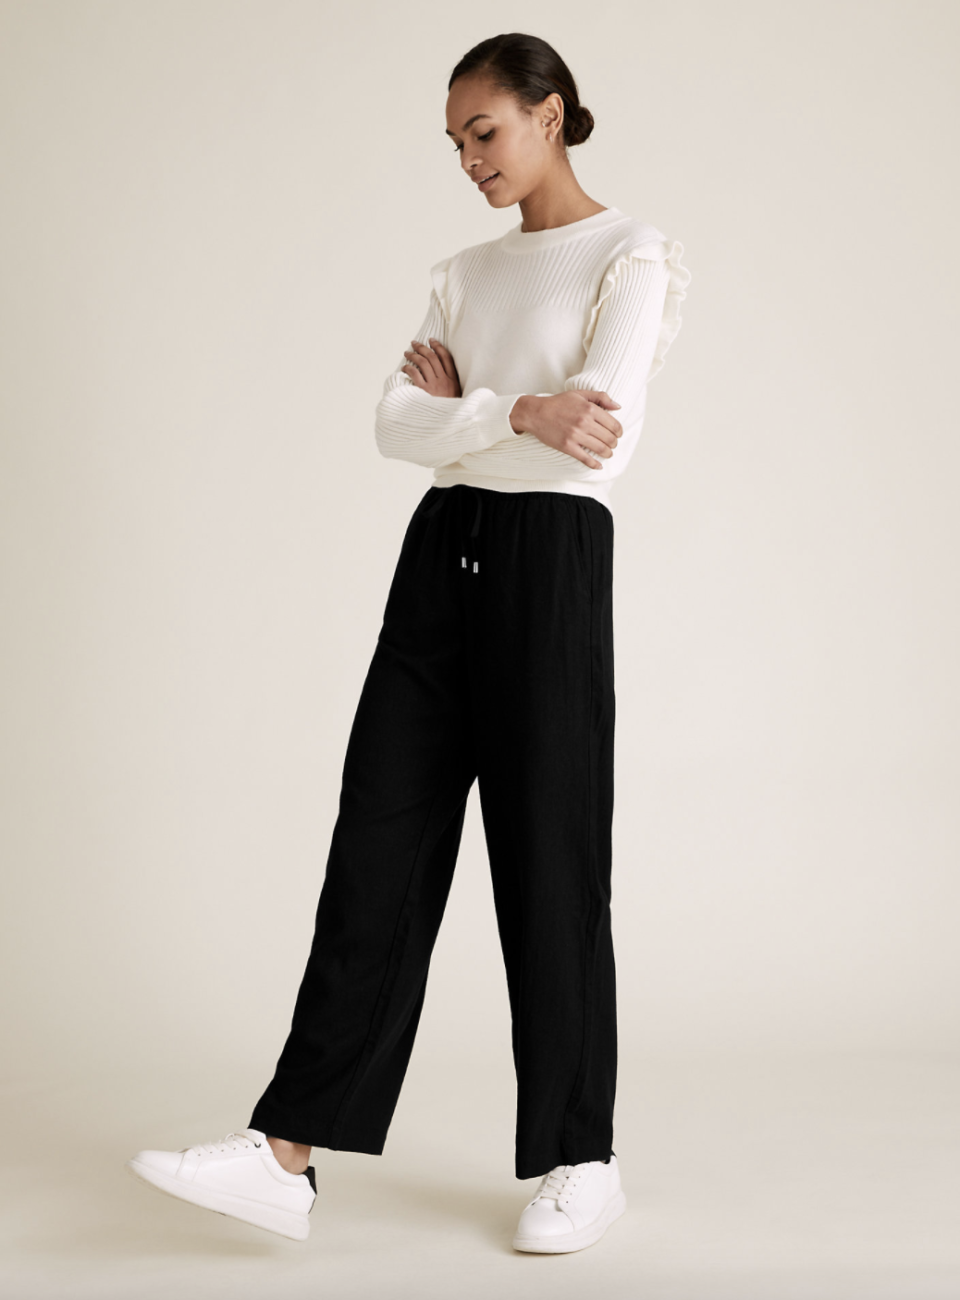 M&S linen trousers come in three colours; black, navy blue and white.  (Marks and Spencer)